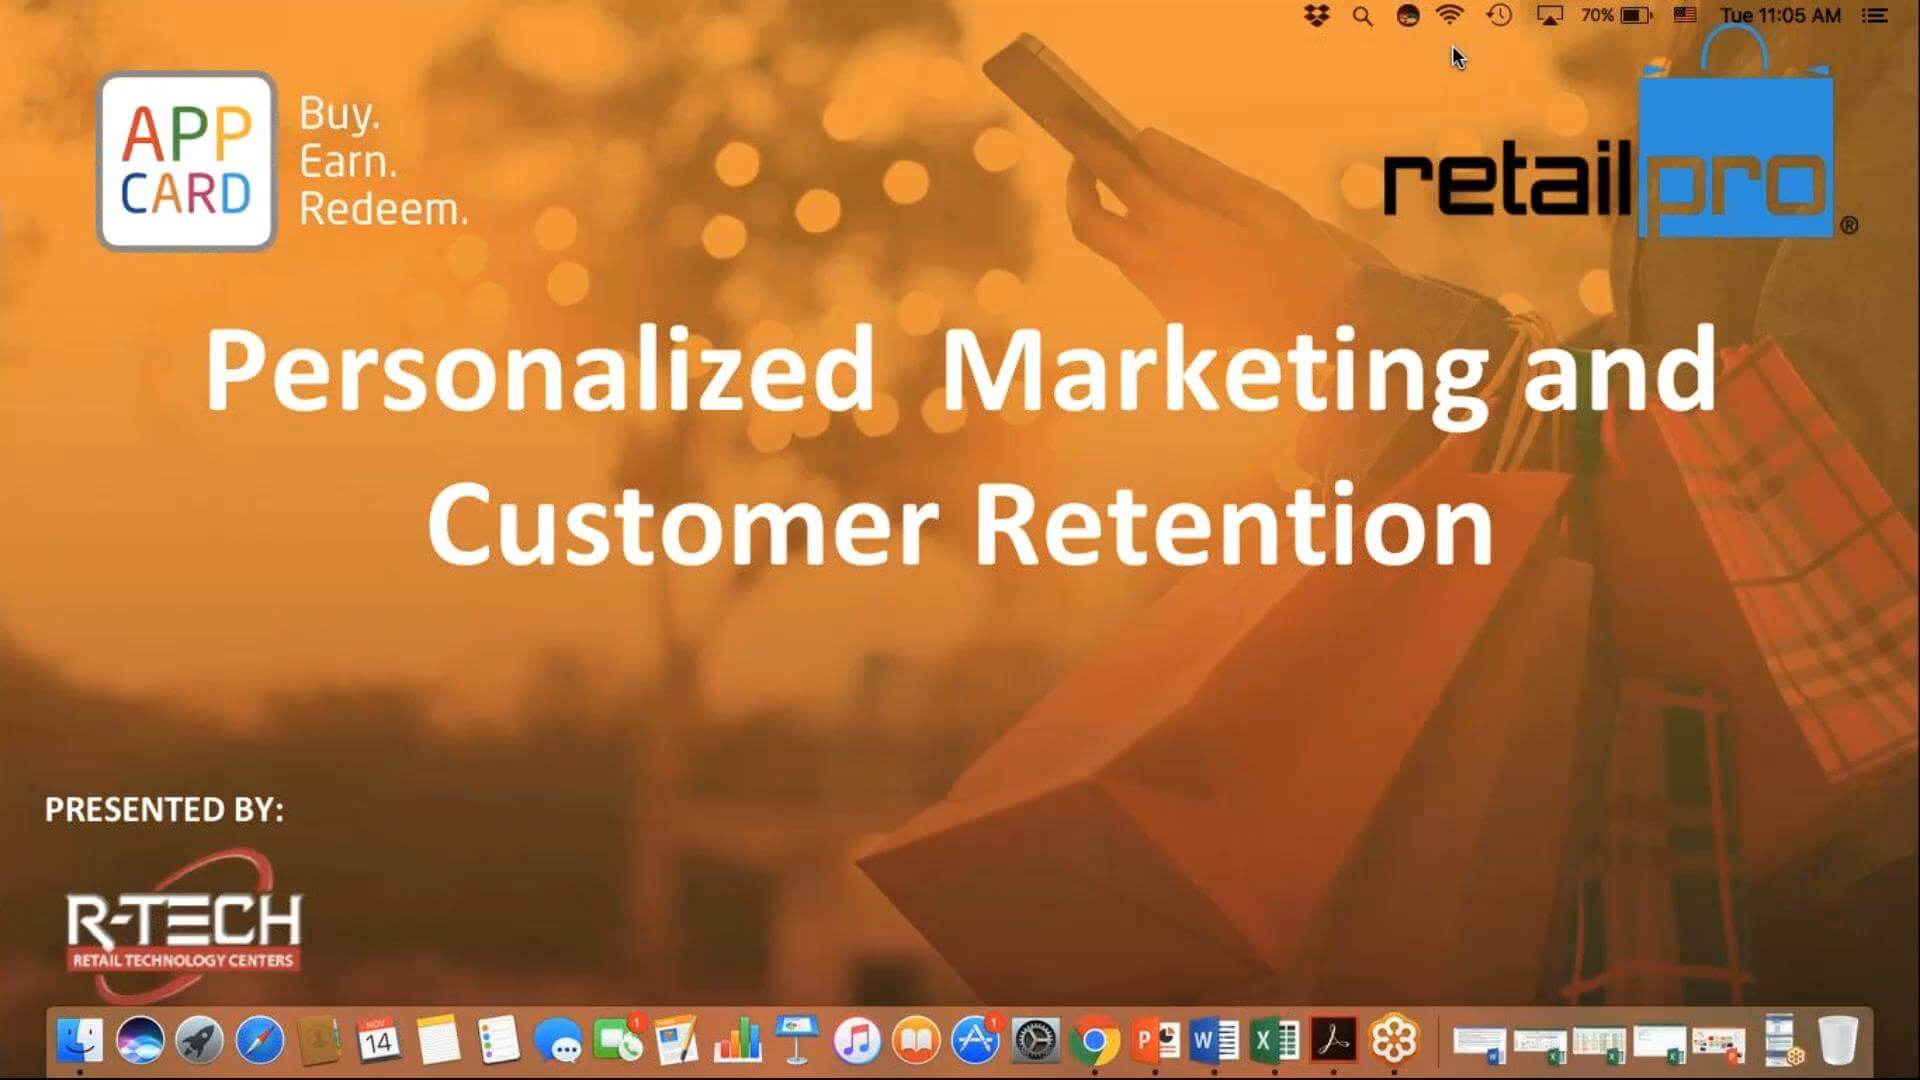 Personalized Marketing and Customer Retention for Retail Pro